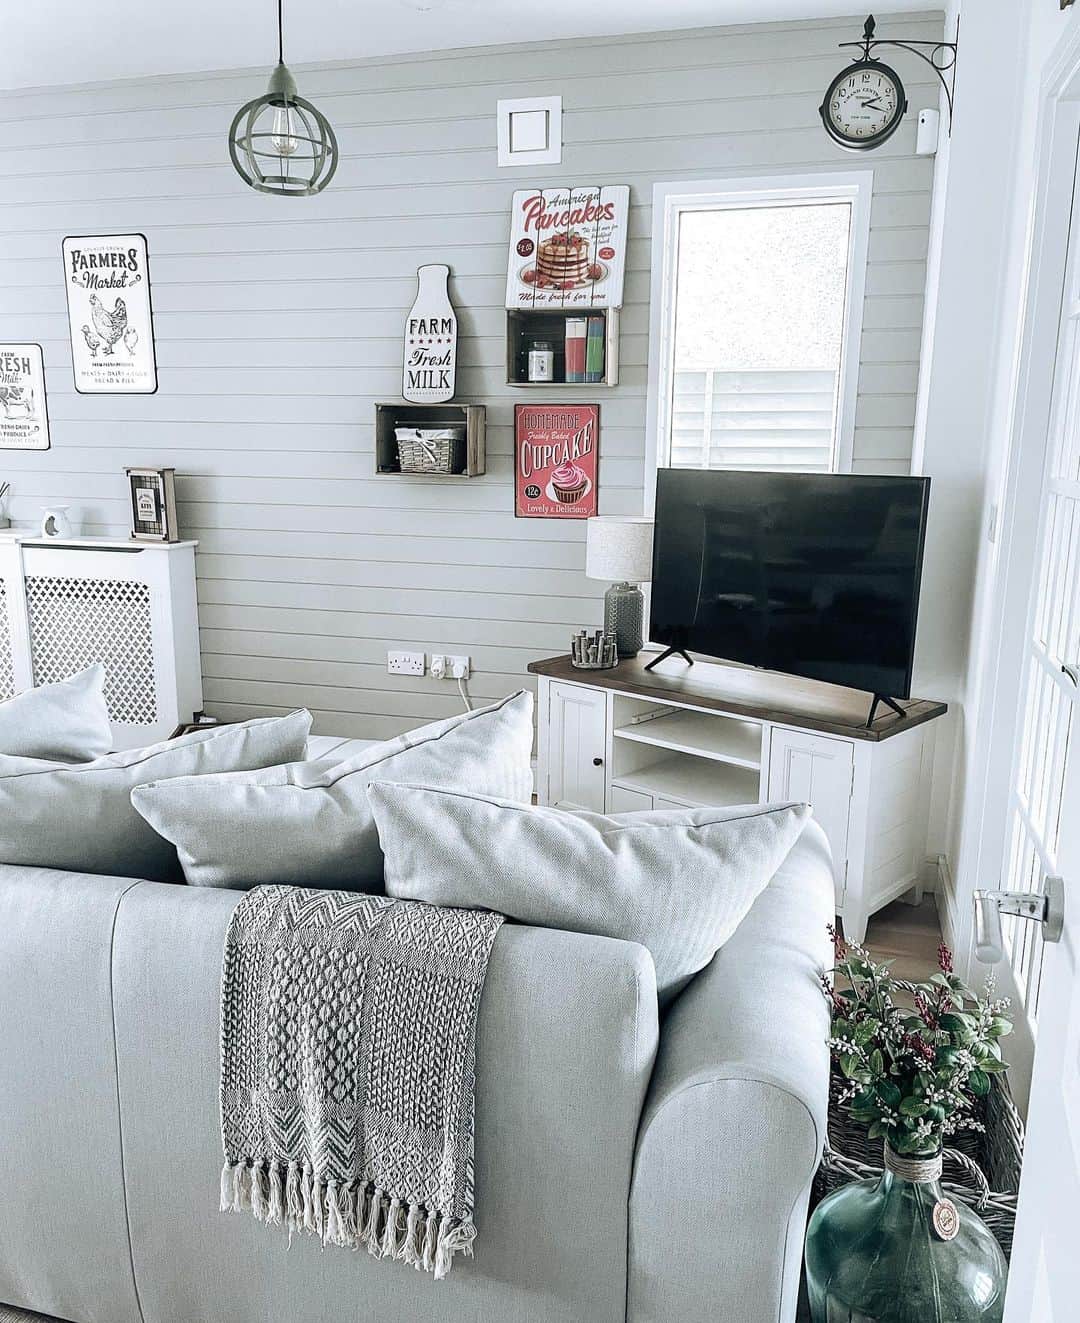 Contemporary Update on Shiplap Charm